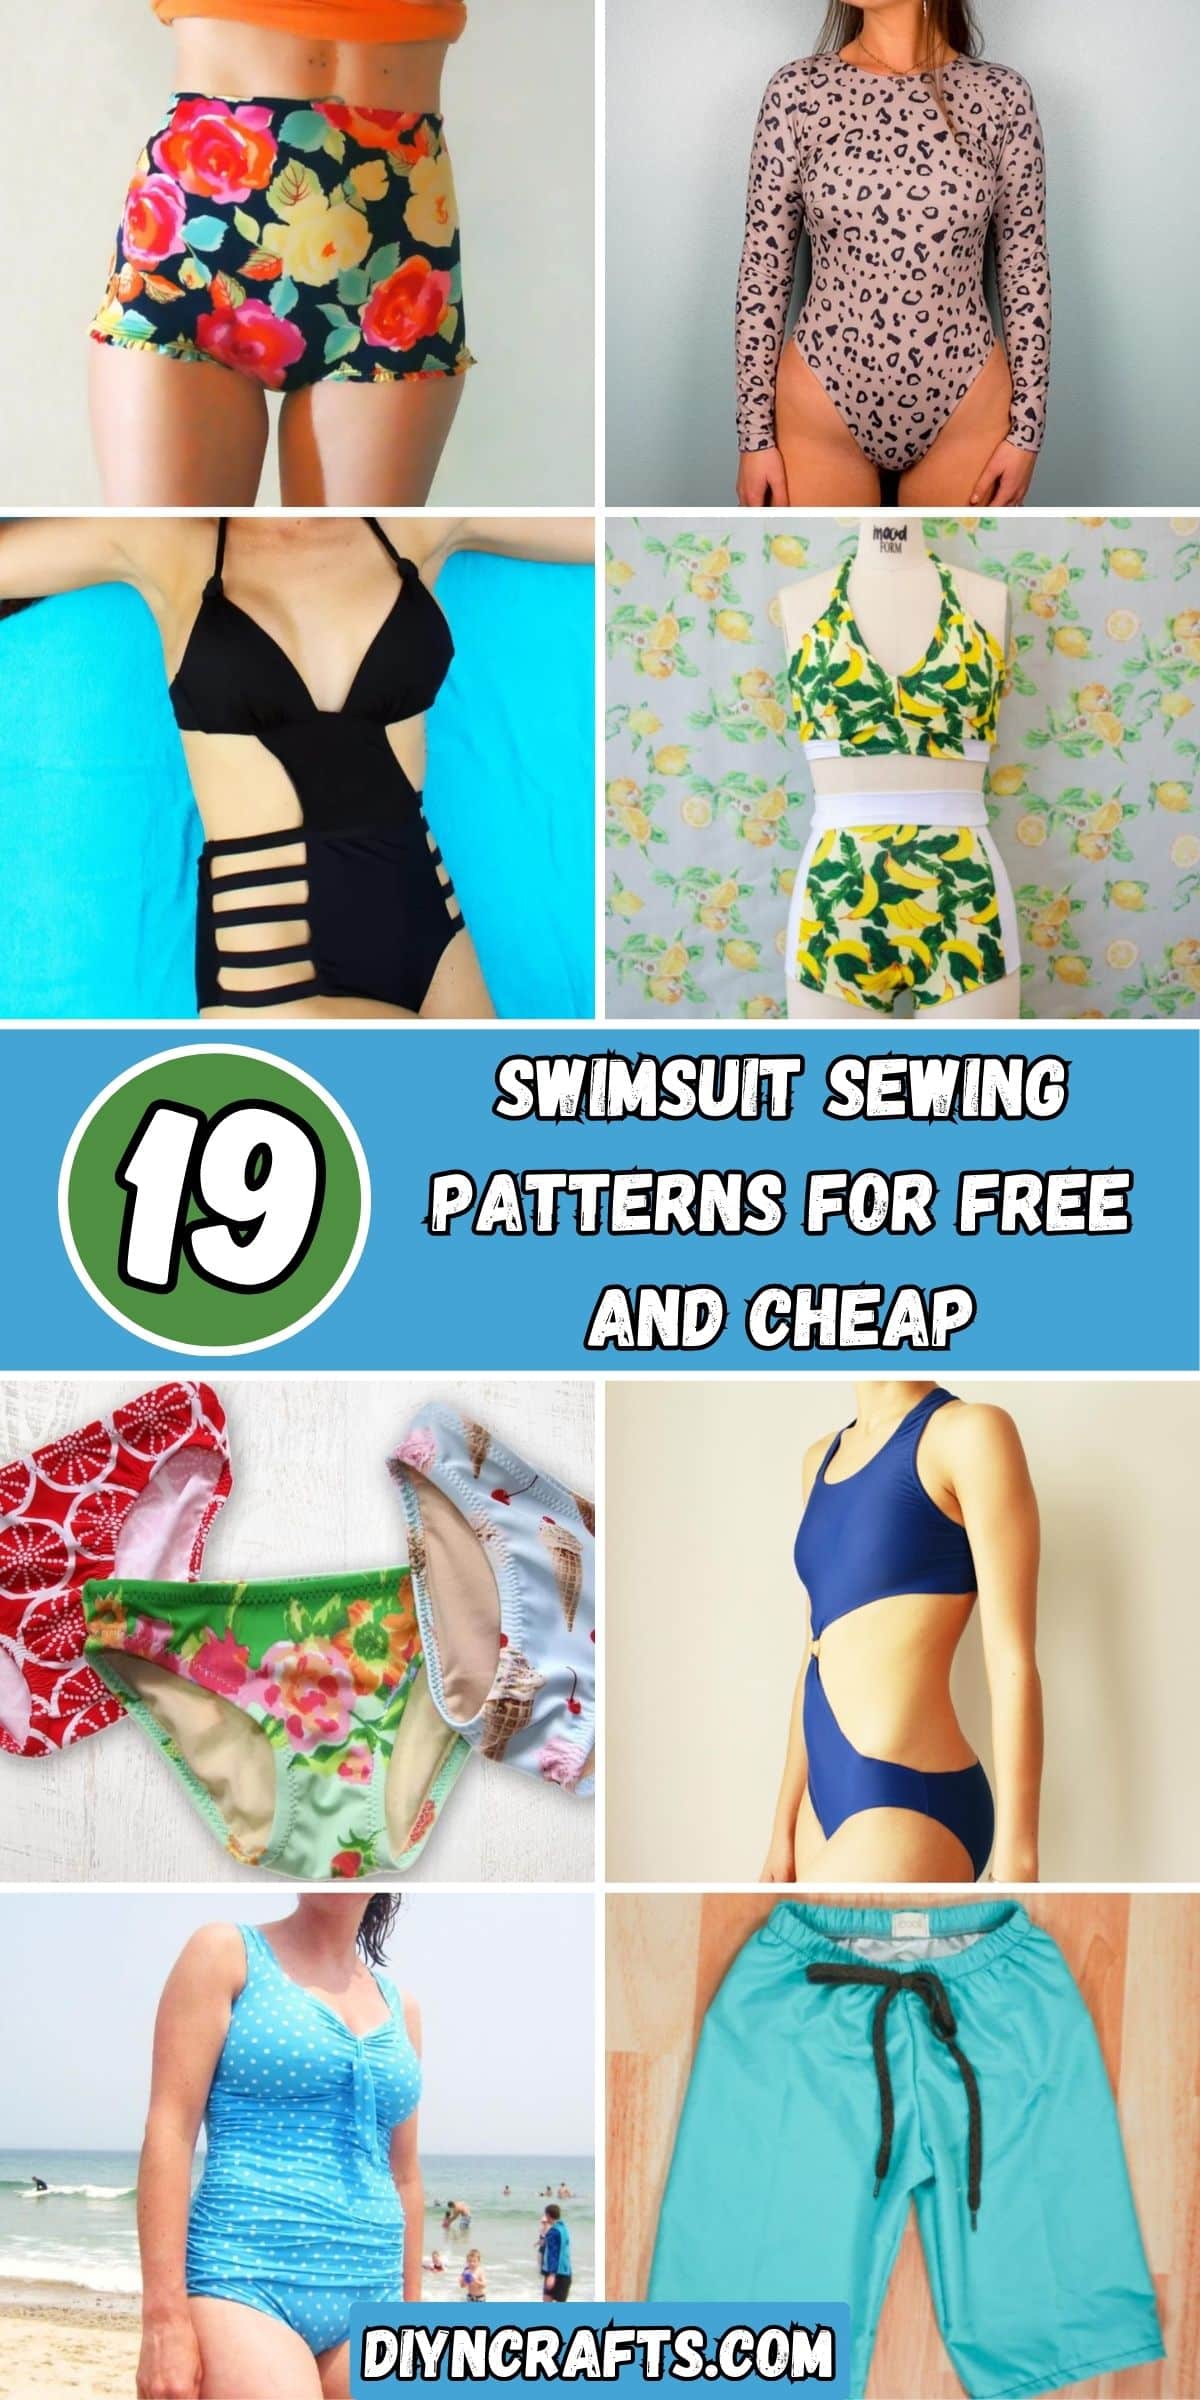 19 Swimsuit Sewing Patterns for Free and Cheap collage.